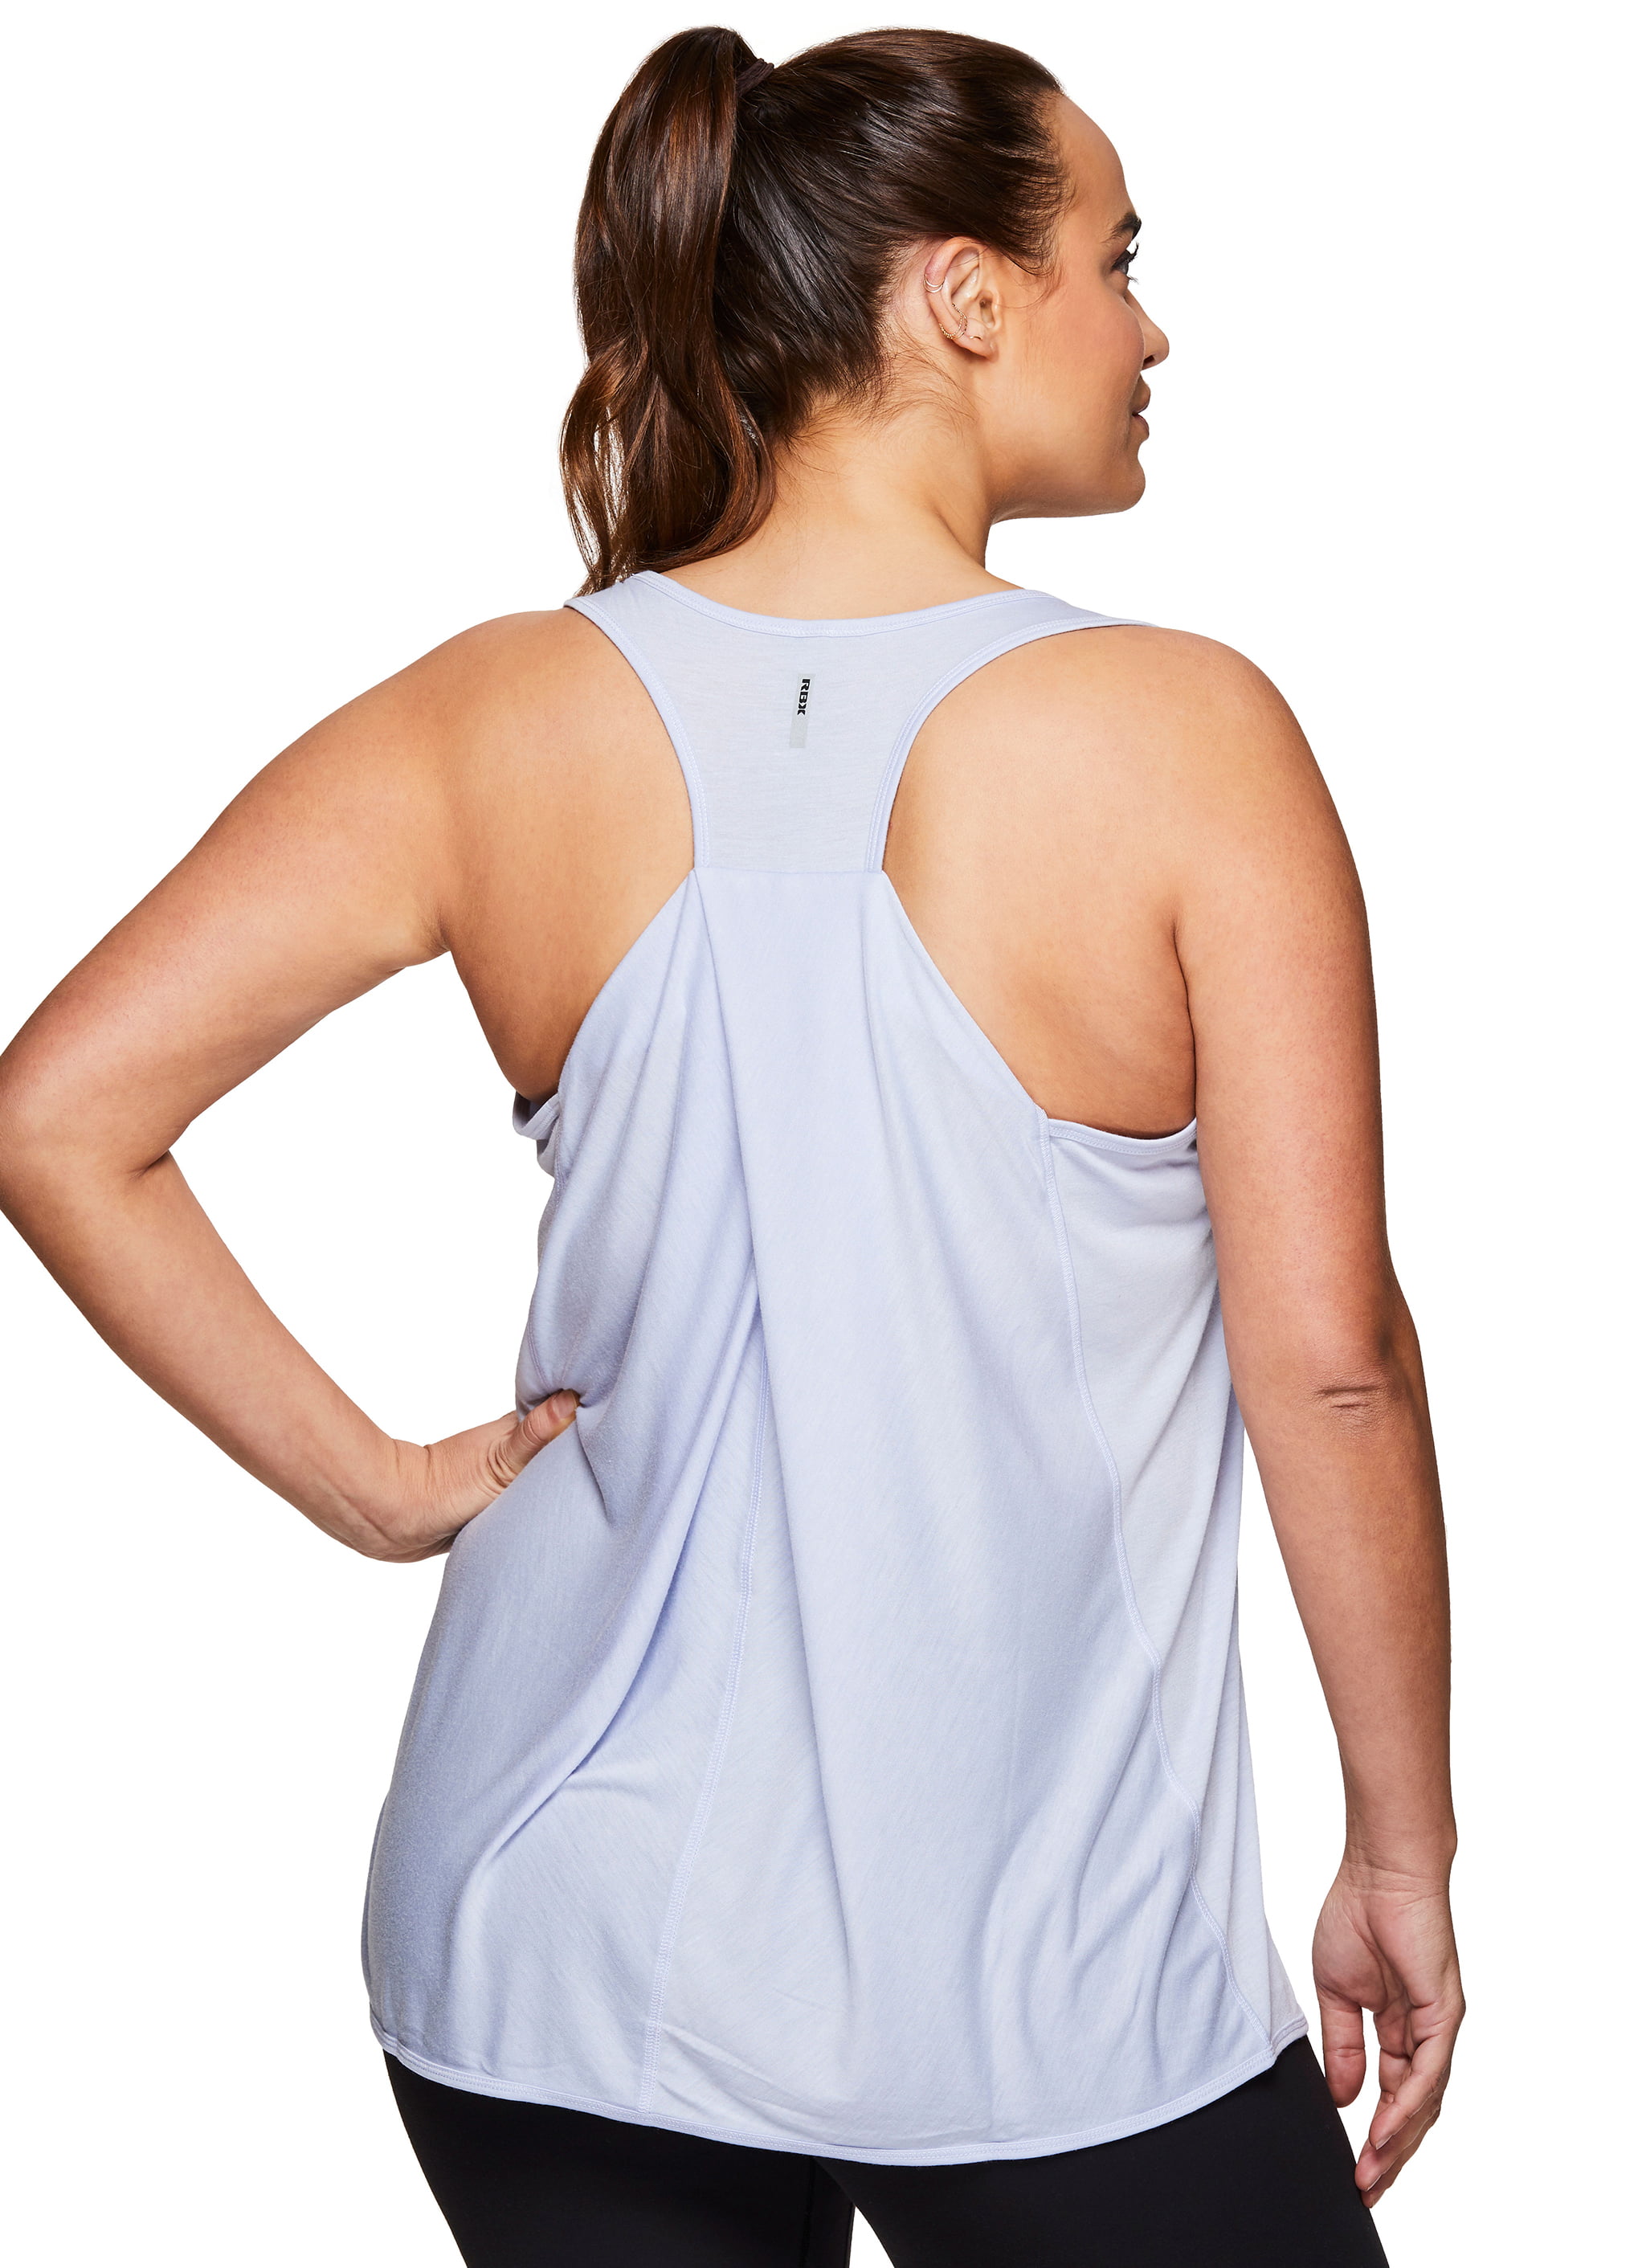 Fihapyli ICTIVE Workout Tops for Women Loose fit Racerback Tank